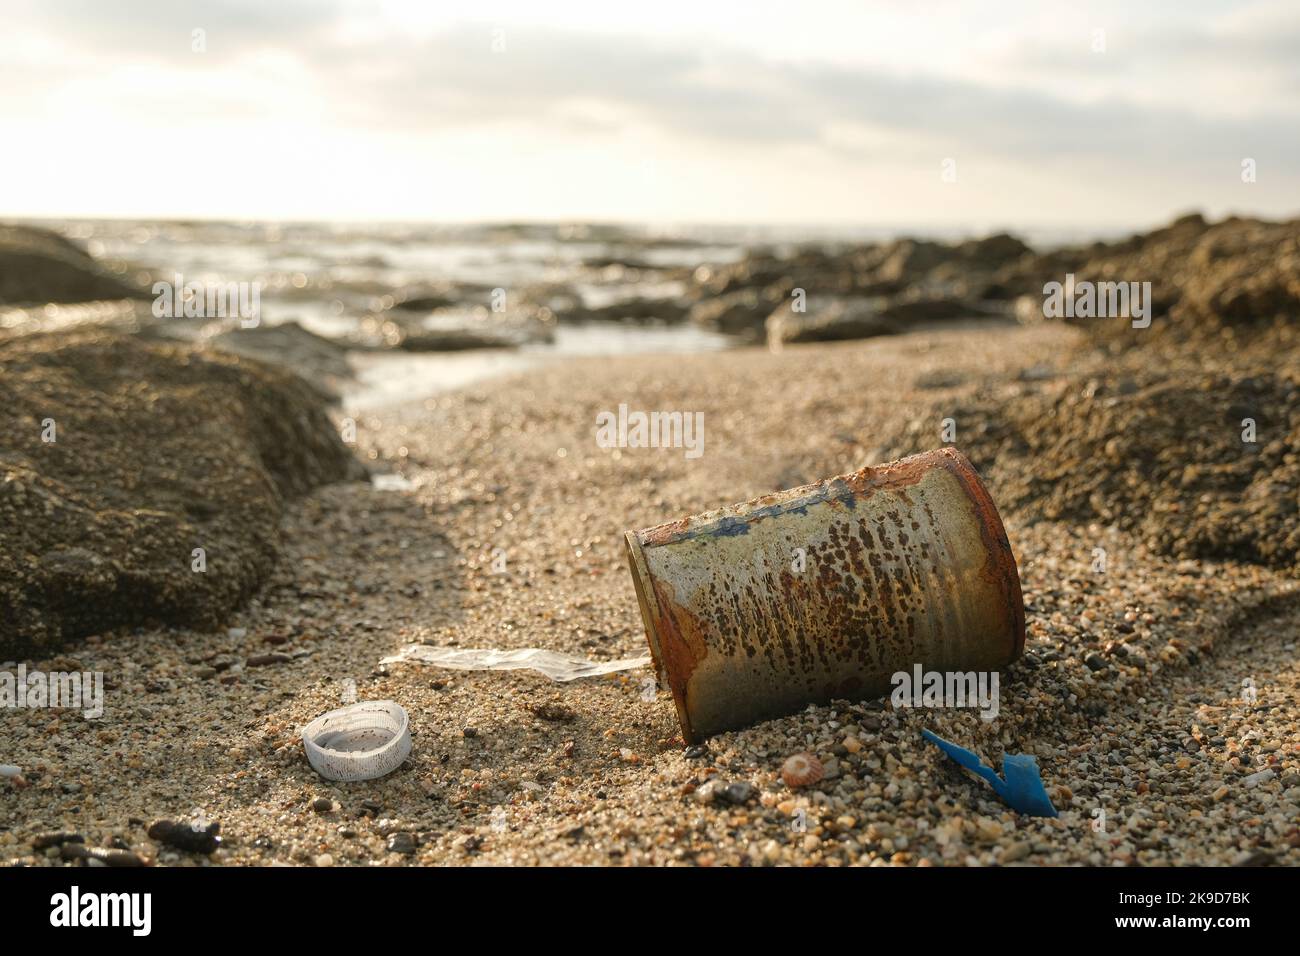 Used rusted metal box and microplastics debris discarded on sea ecosystem,environmental pollution damage Stock Photo